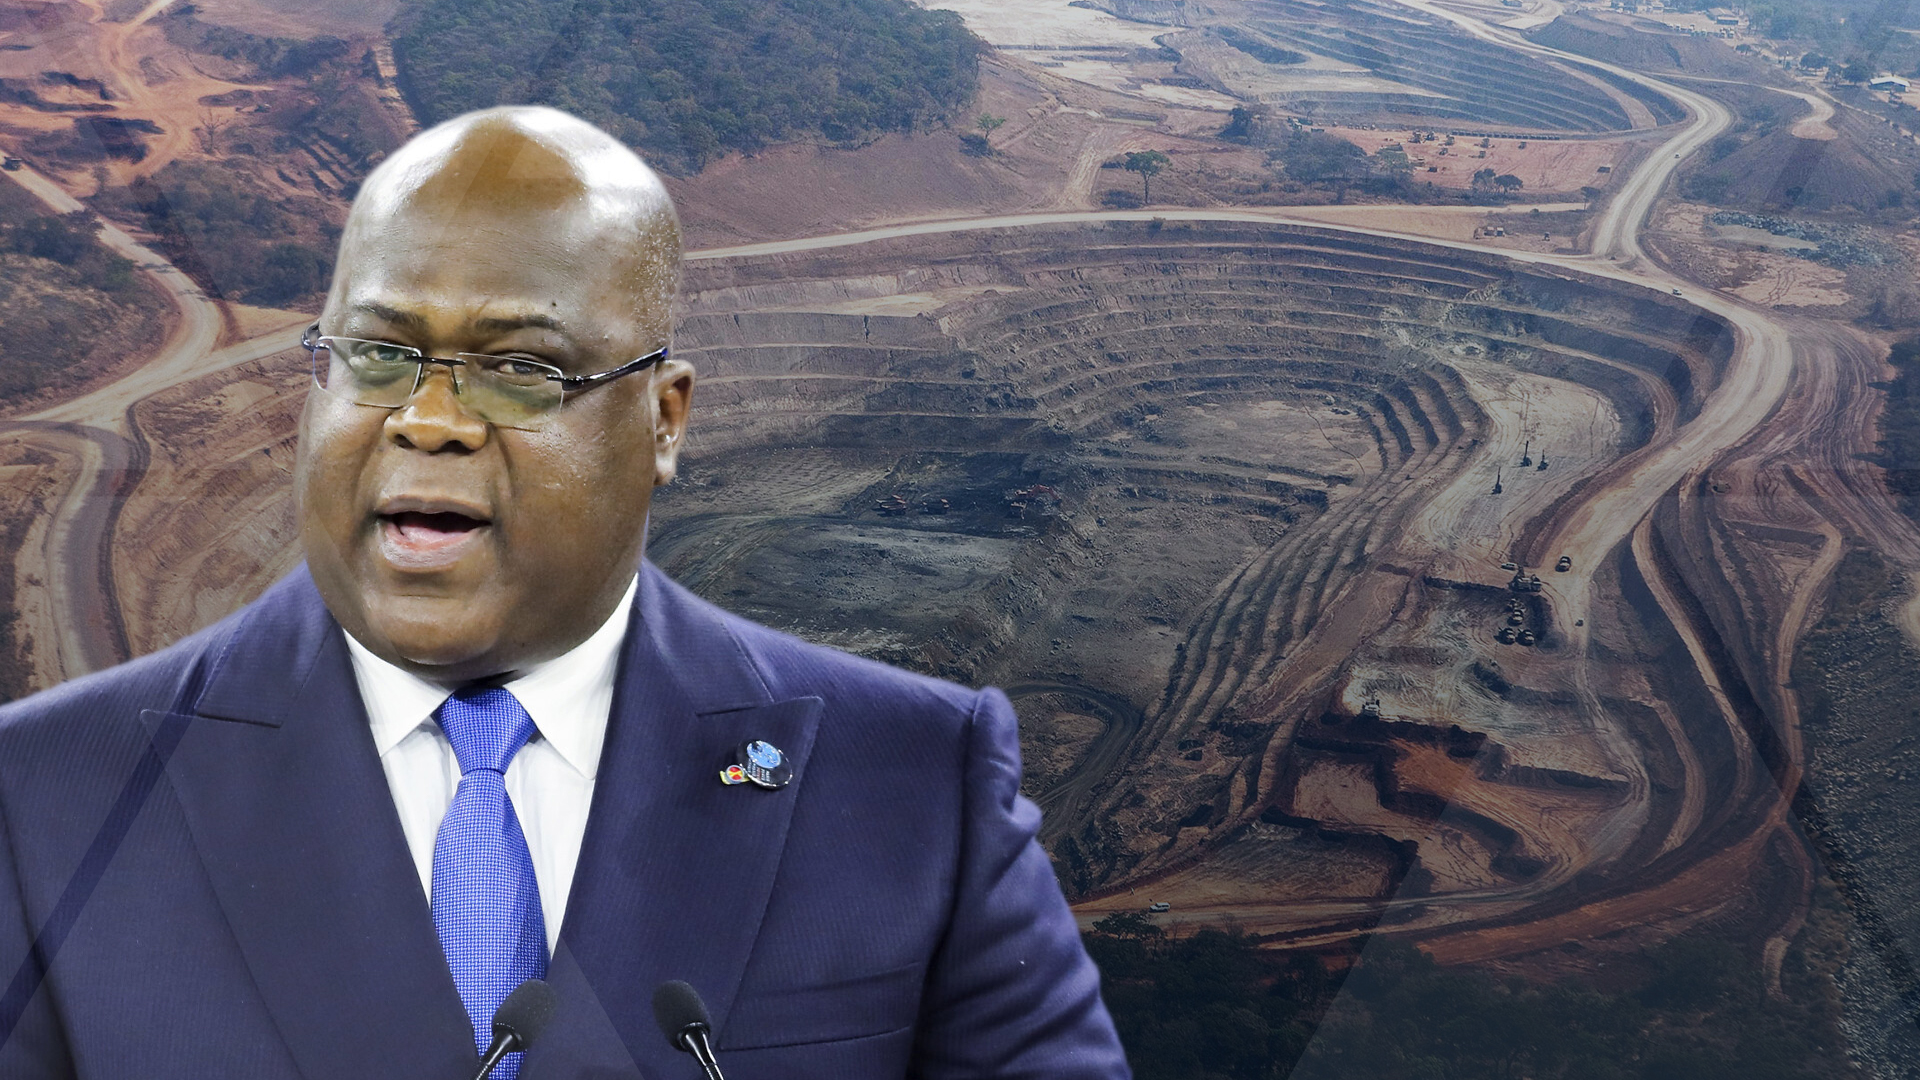 DRC: GOVERNMENT SEEKS SWEEPING MINING CONTRACT REVIEW AS ELECTION APPROACHES